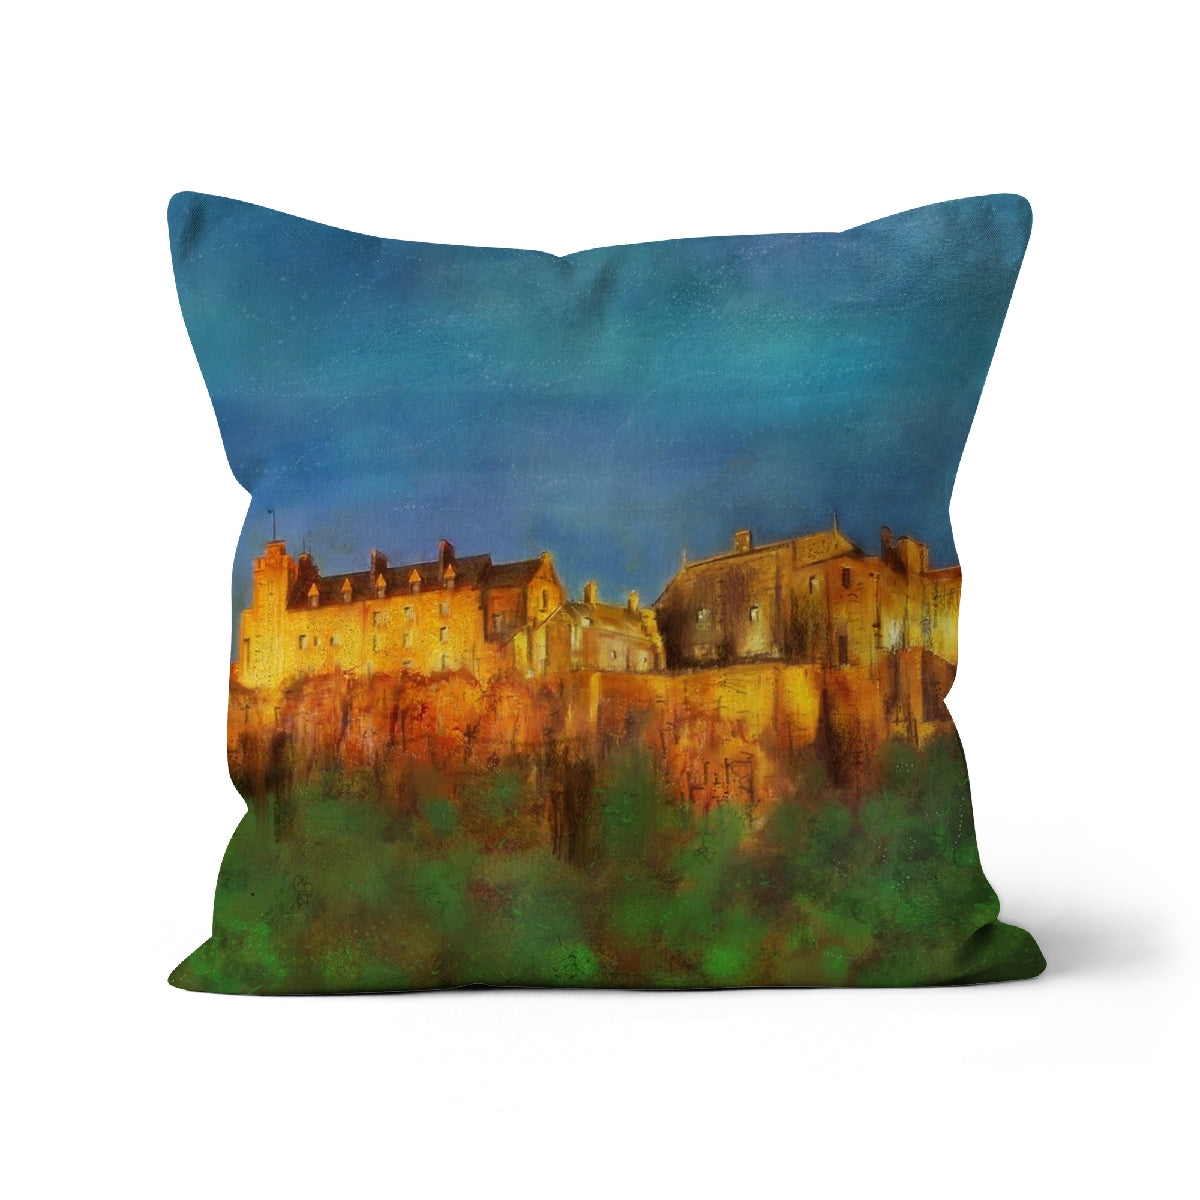 Stirling Castle Art Gifts Cushion-Cushions-Historic & Iconic Scotland Art Gallery-Faux Suede-18"x18"-Paintings, Prints, Homeware, Art Gifts From Scotland By Scottish Artist Kevin Hunter